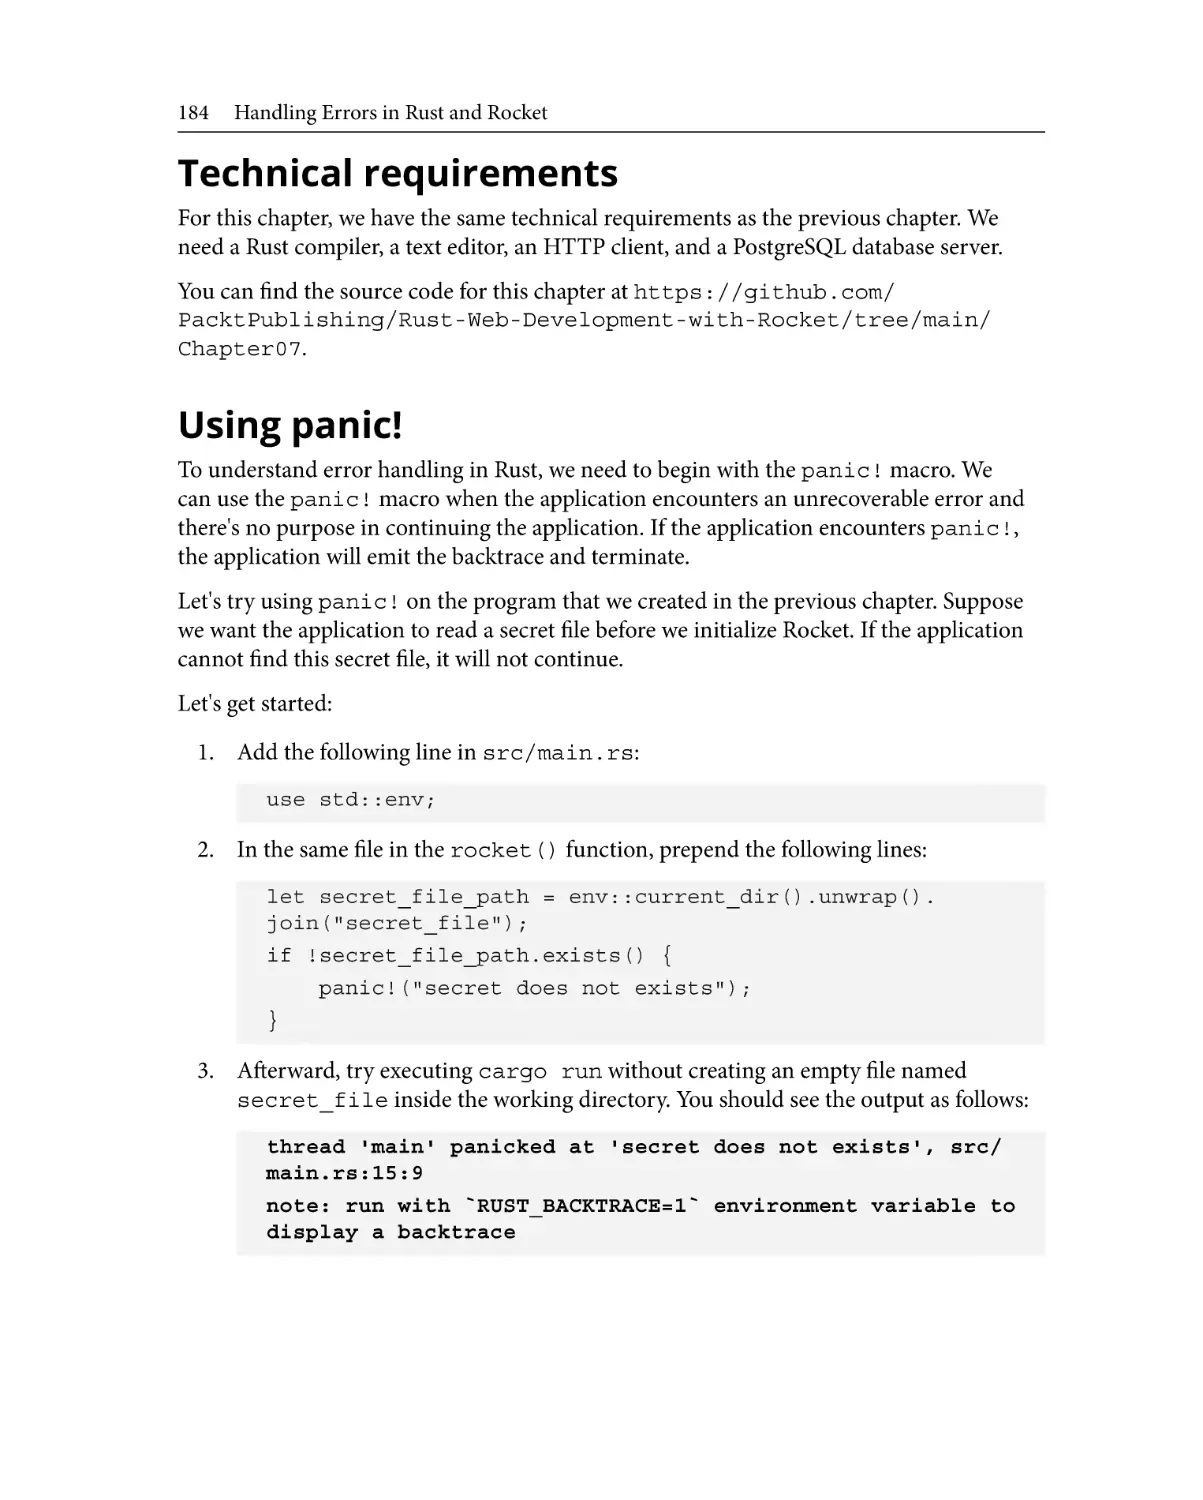 Technical requirements
Using panic!